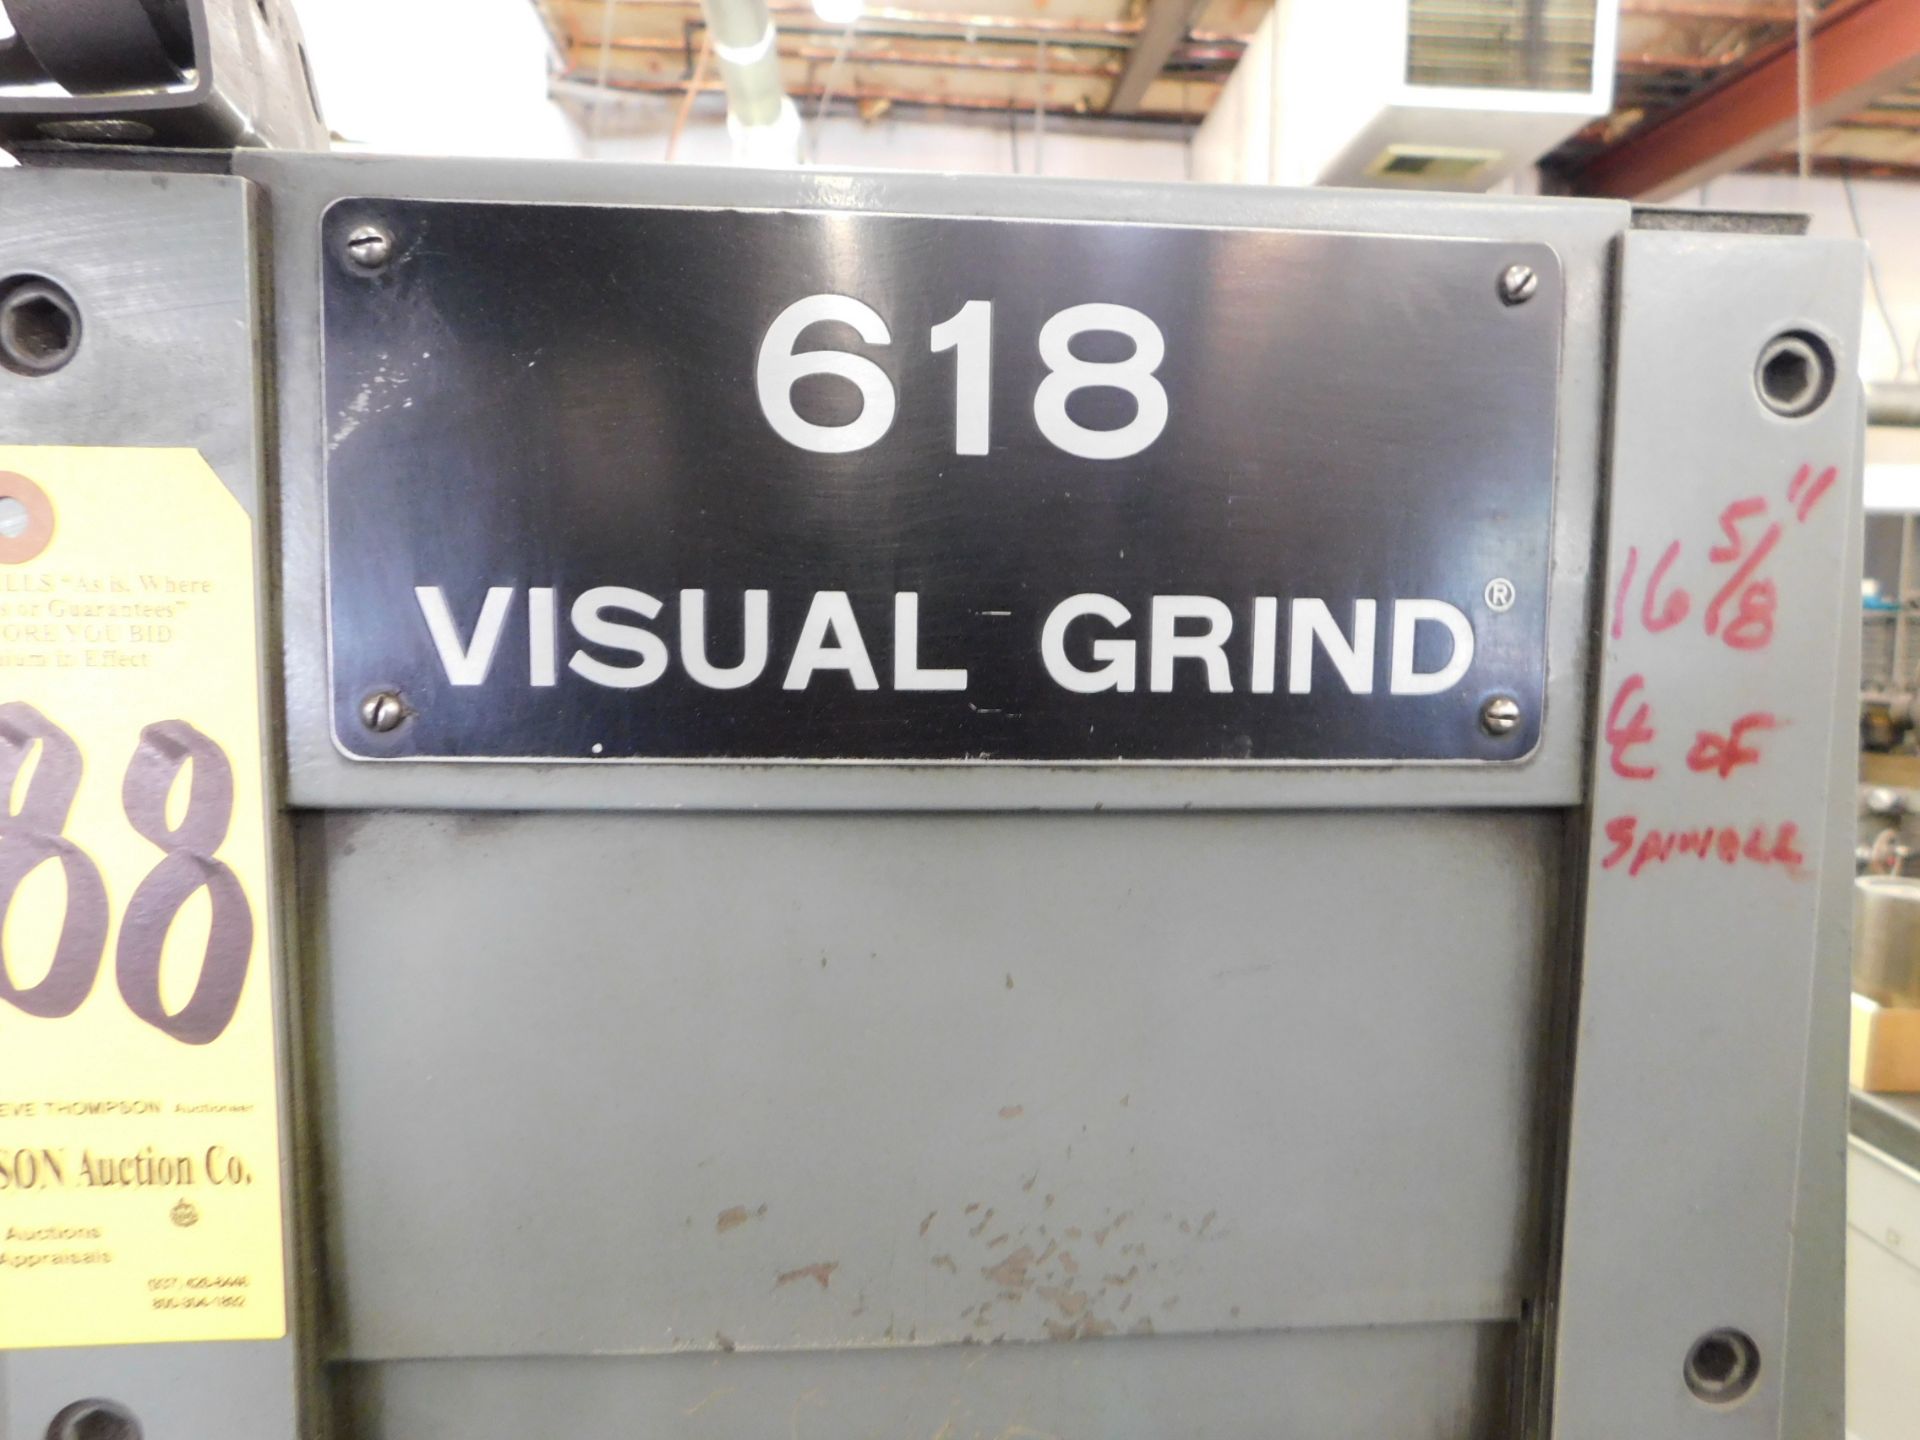 Brown & Sharpe Micro Master "Visual Grind" Hydraulic Surface Grinder, s/n 523-6185-7241, 6 In. X - Image 5 of 5